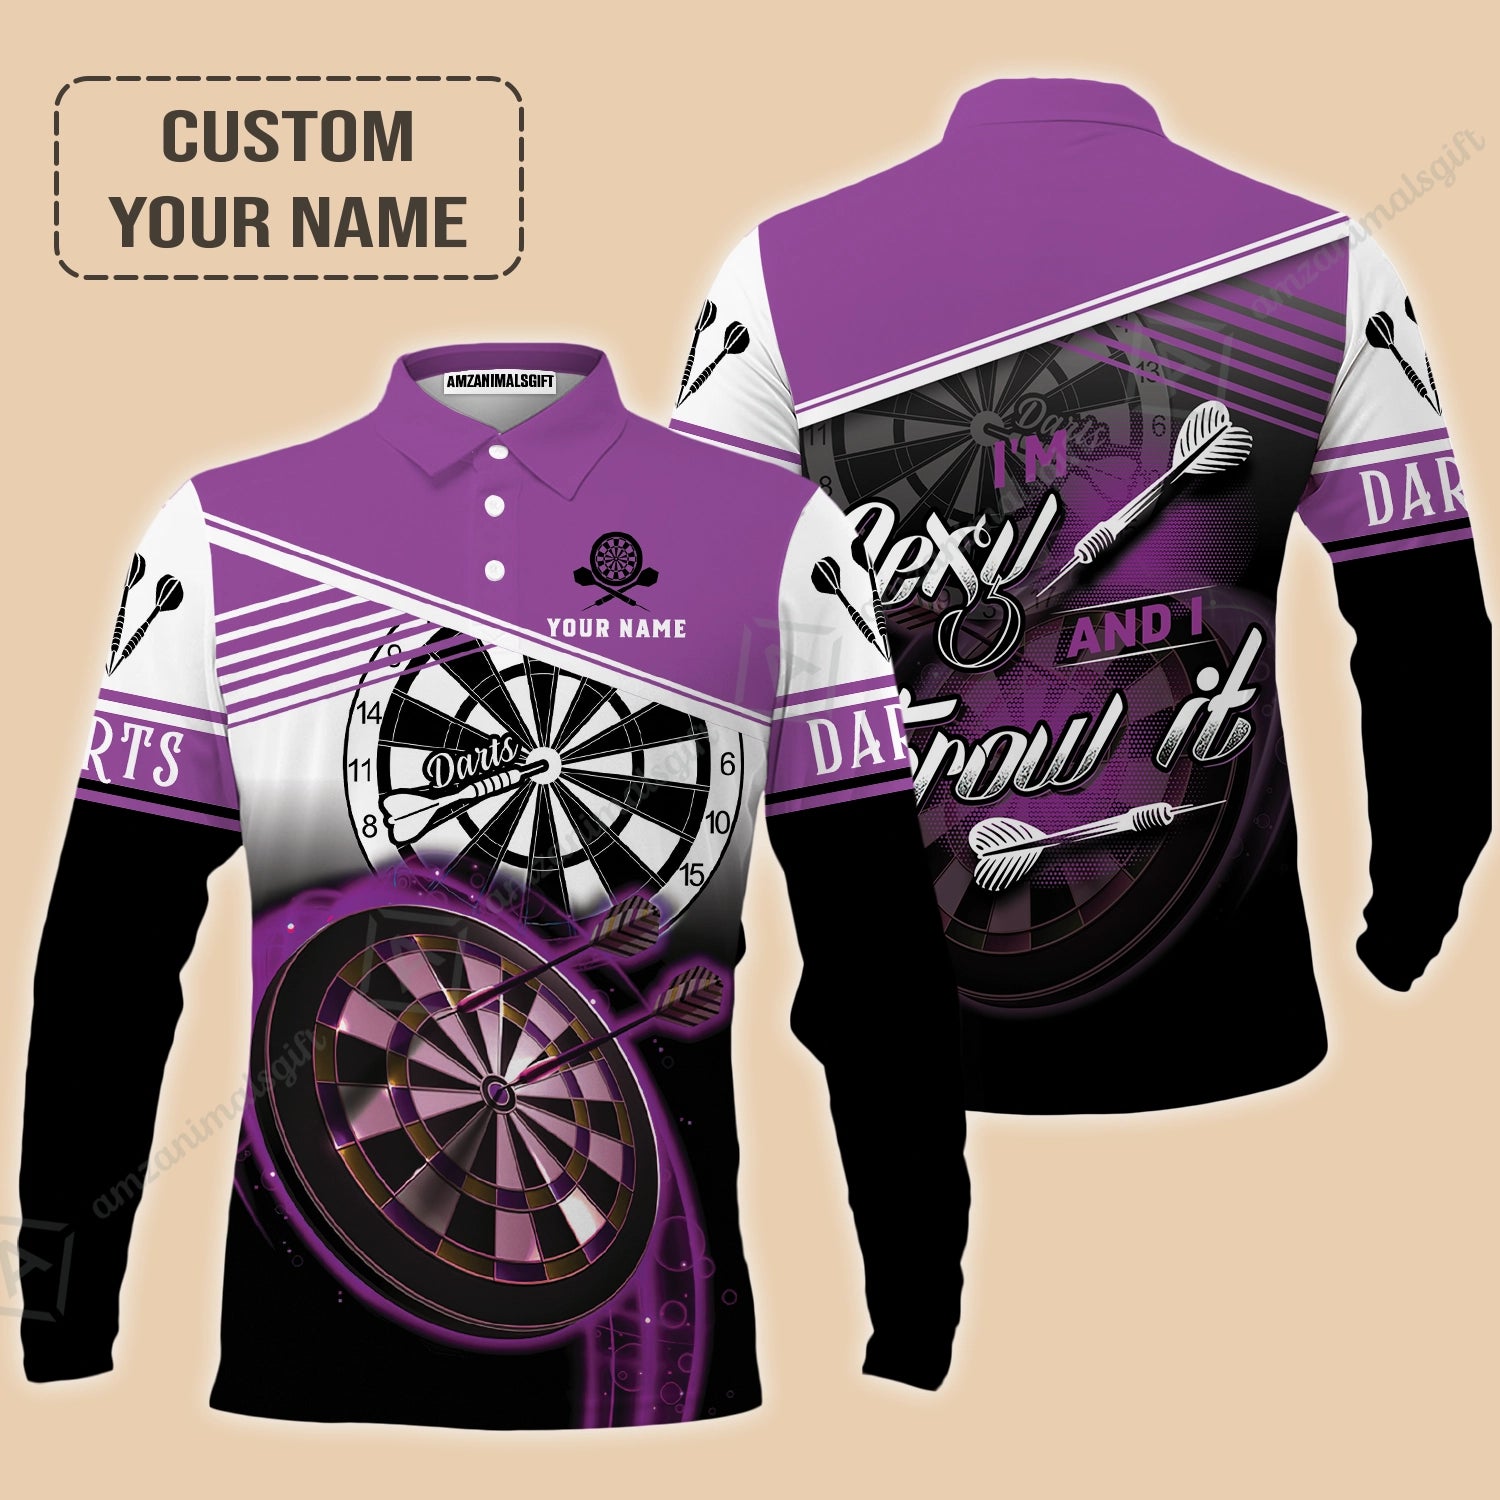 Personalized Darts Long Polo Shirt, Darts Purple Color Customized Polo Shirt I'm Sexy And I Throw It, Outfits For Darts Players, Darts Team